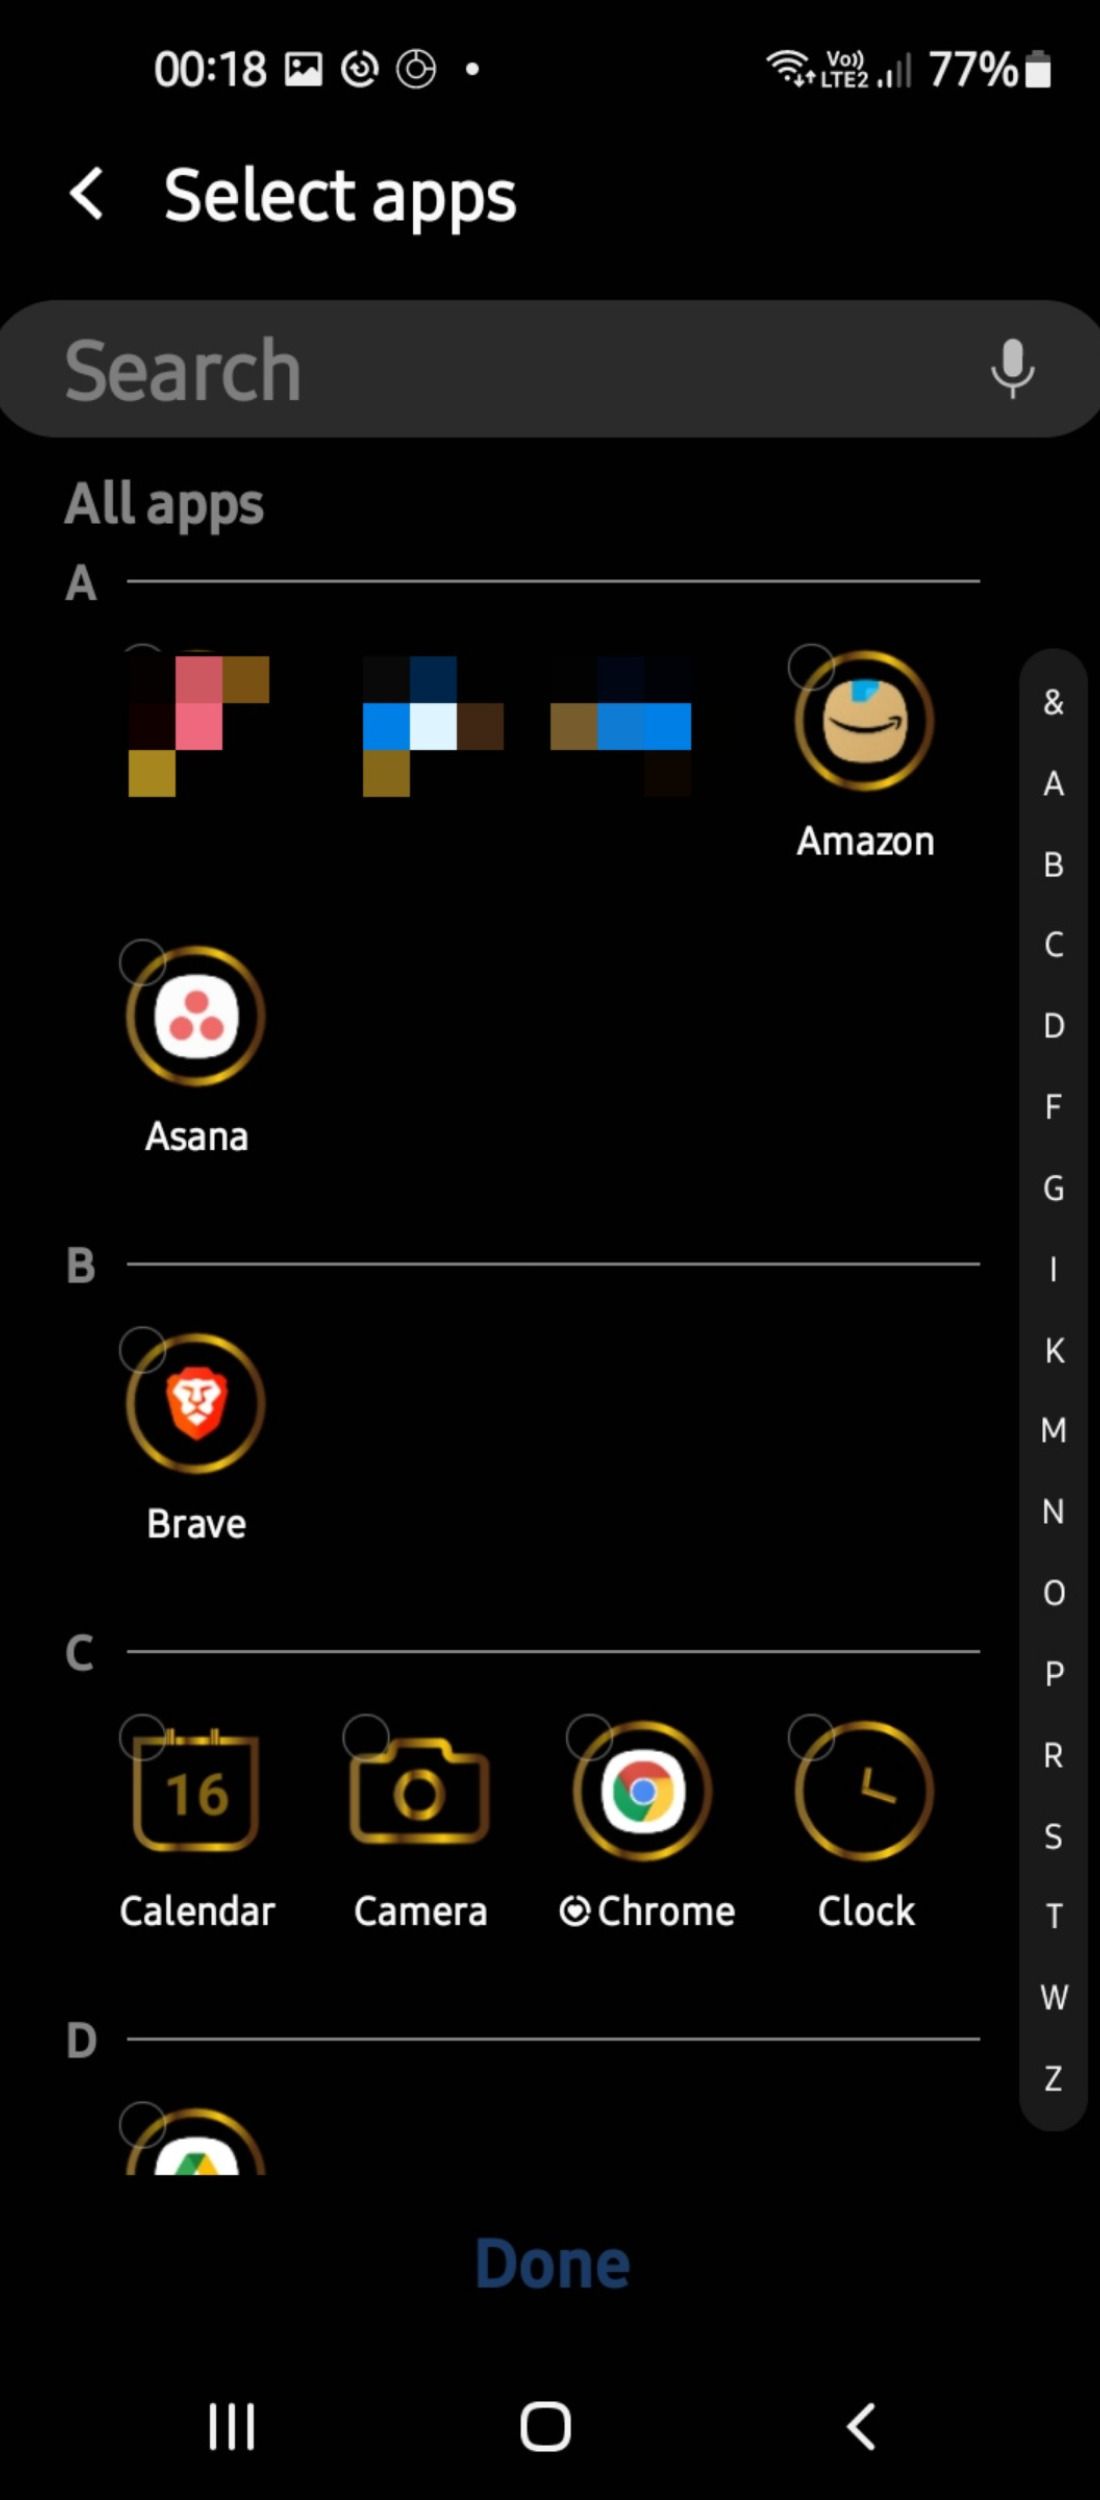 Adding apps by color-coding